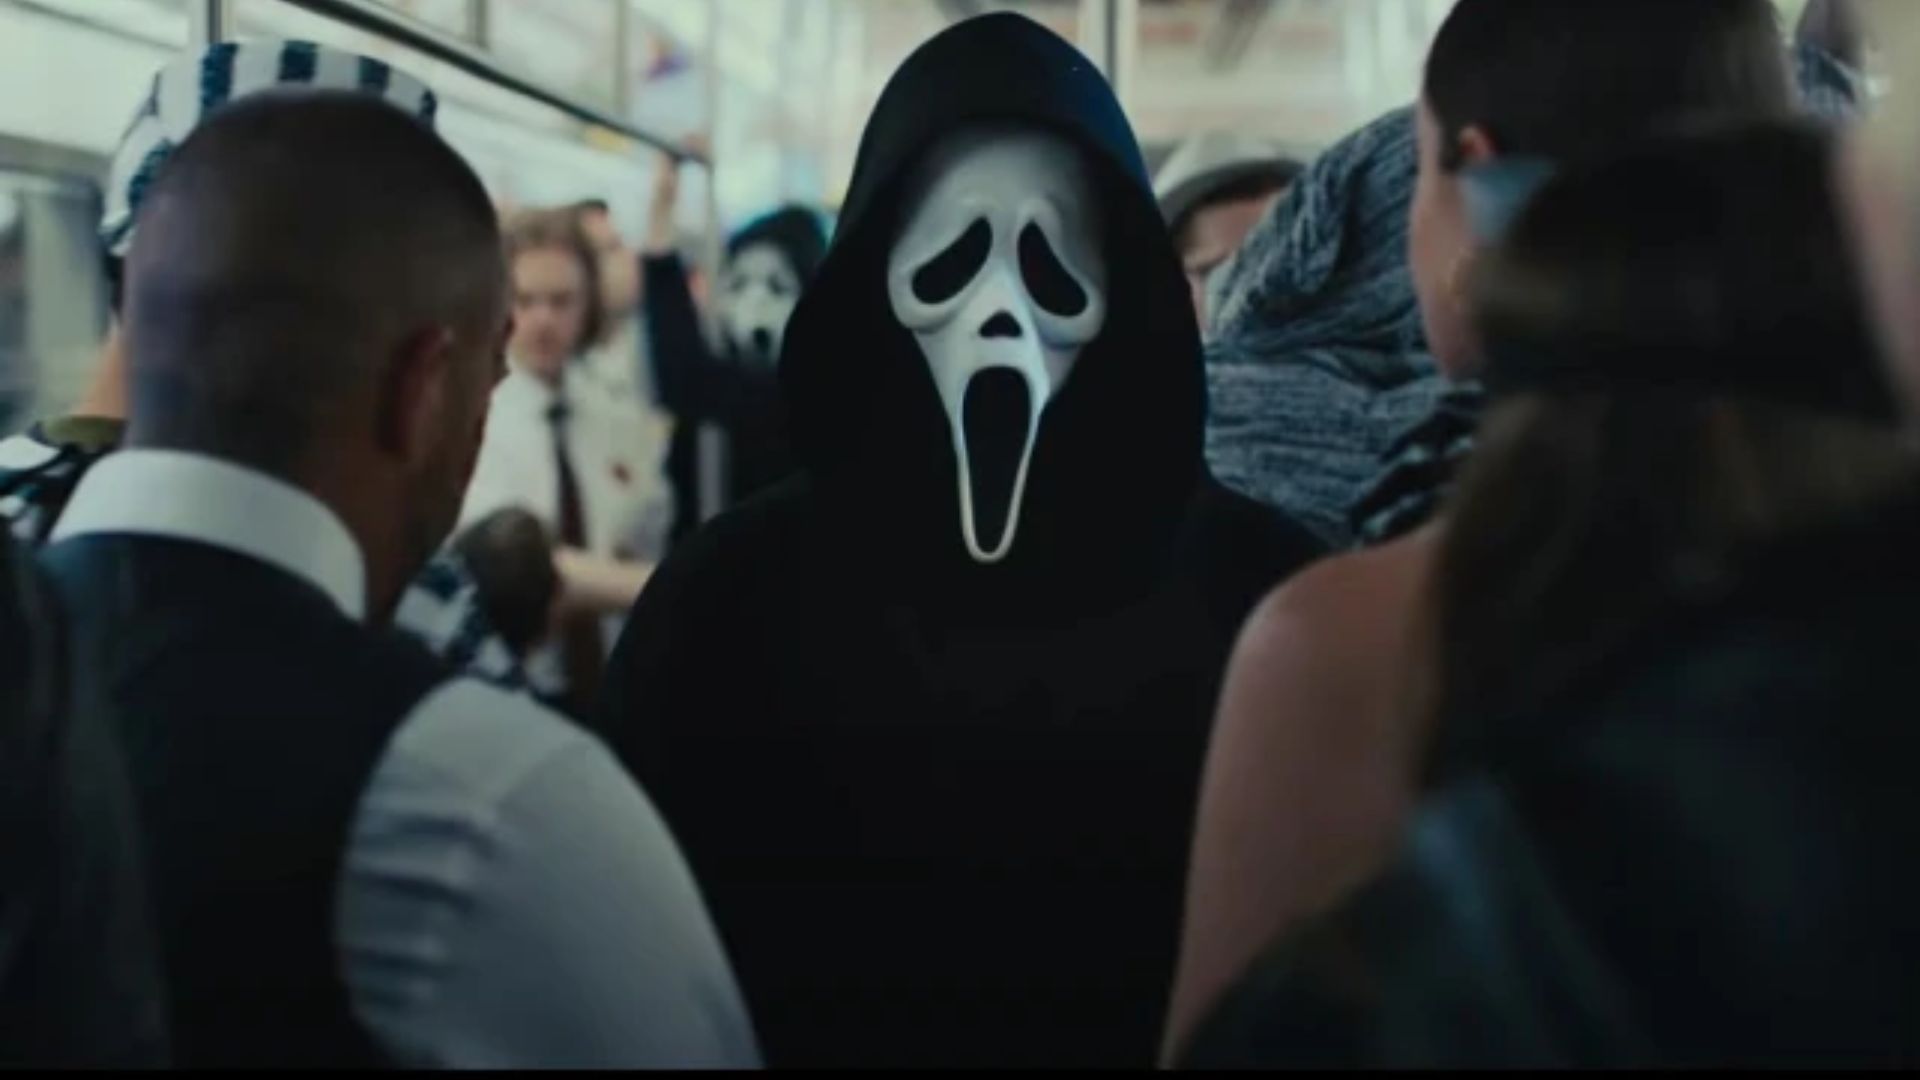 Scream 6 nearly crushed past unique slasher's box office